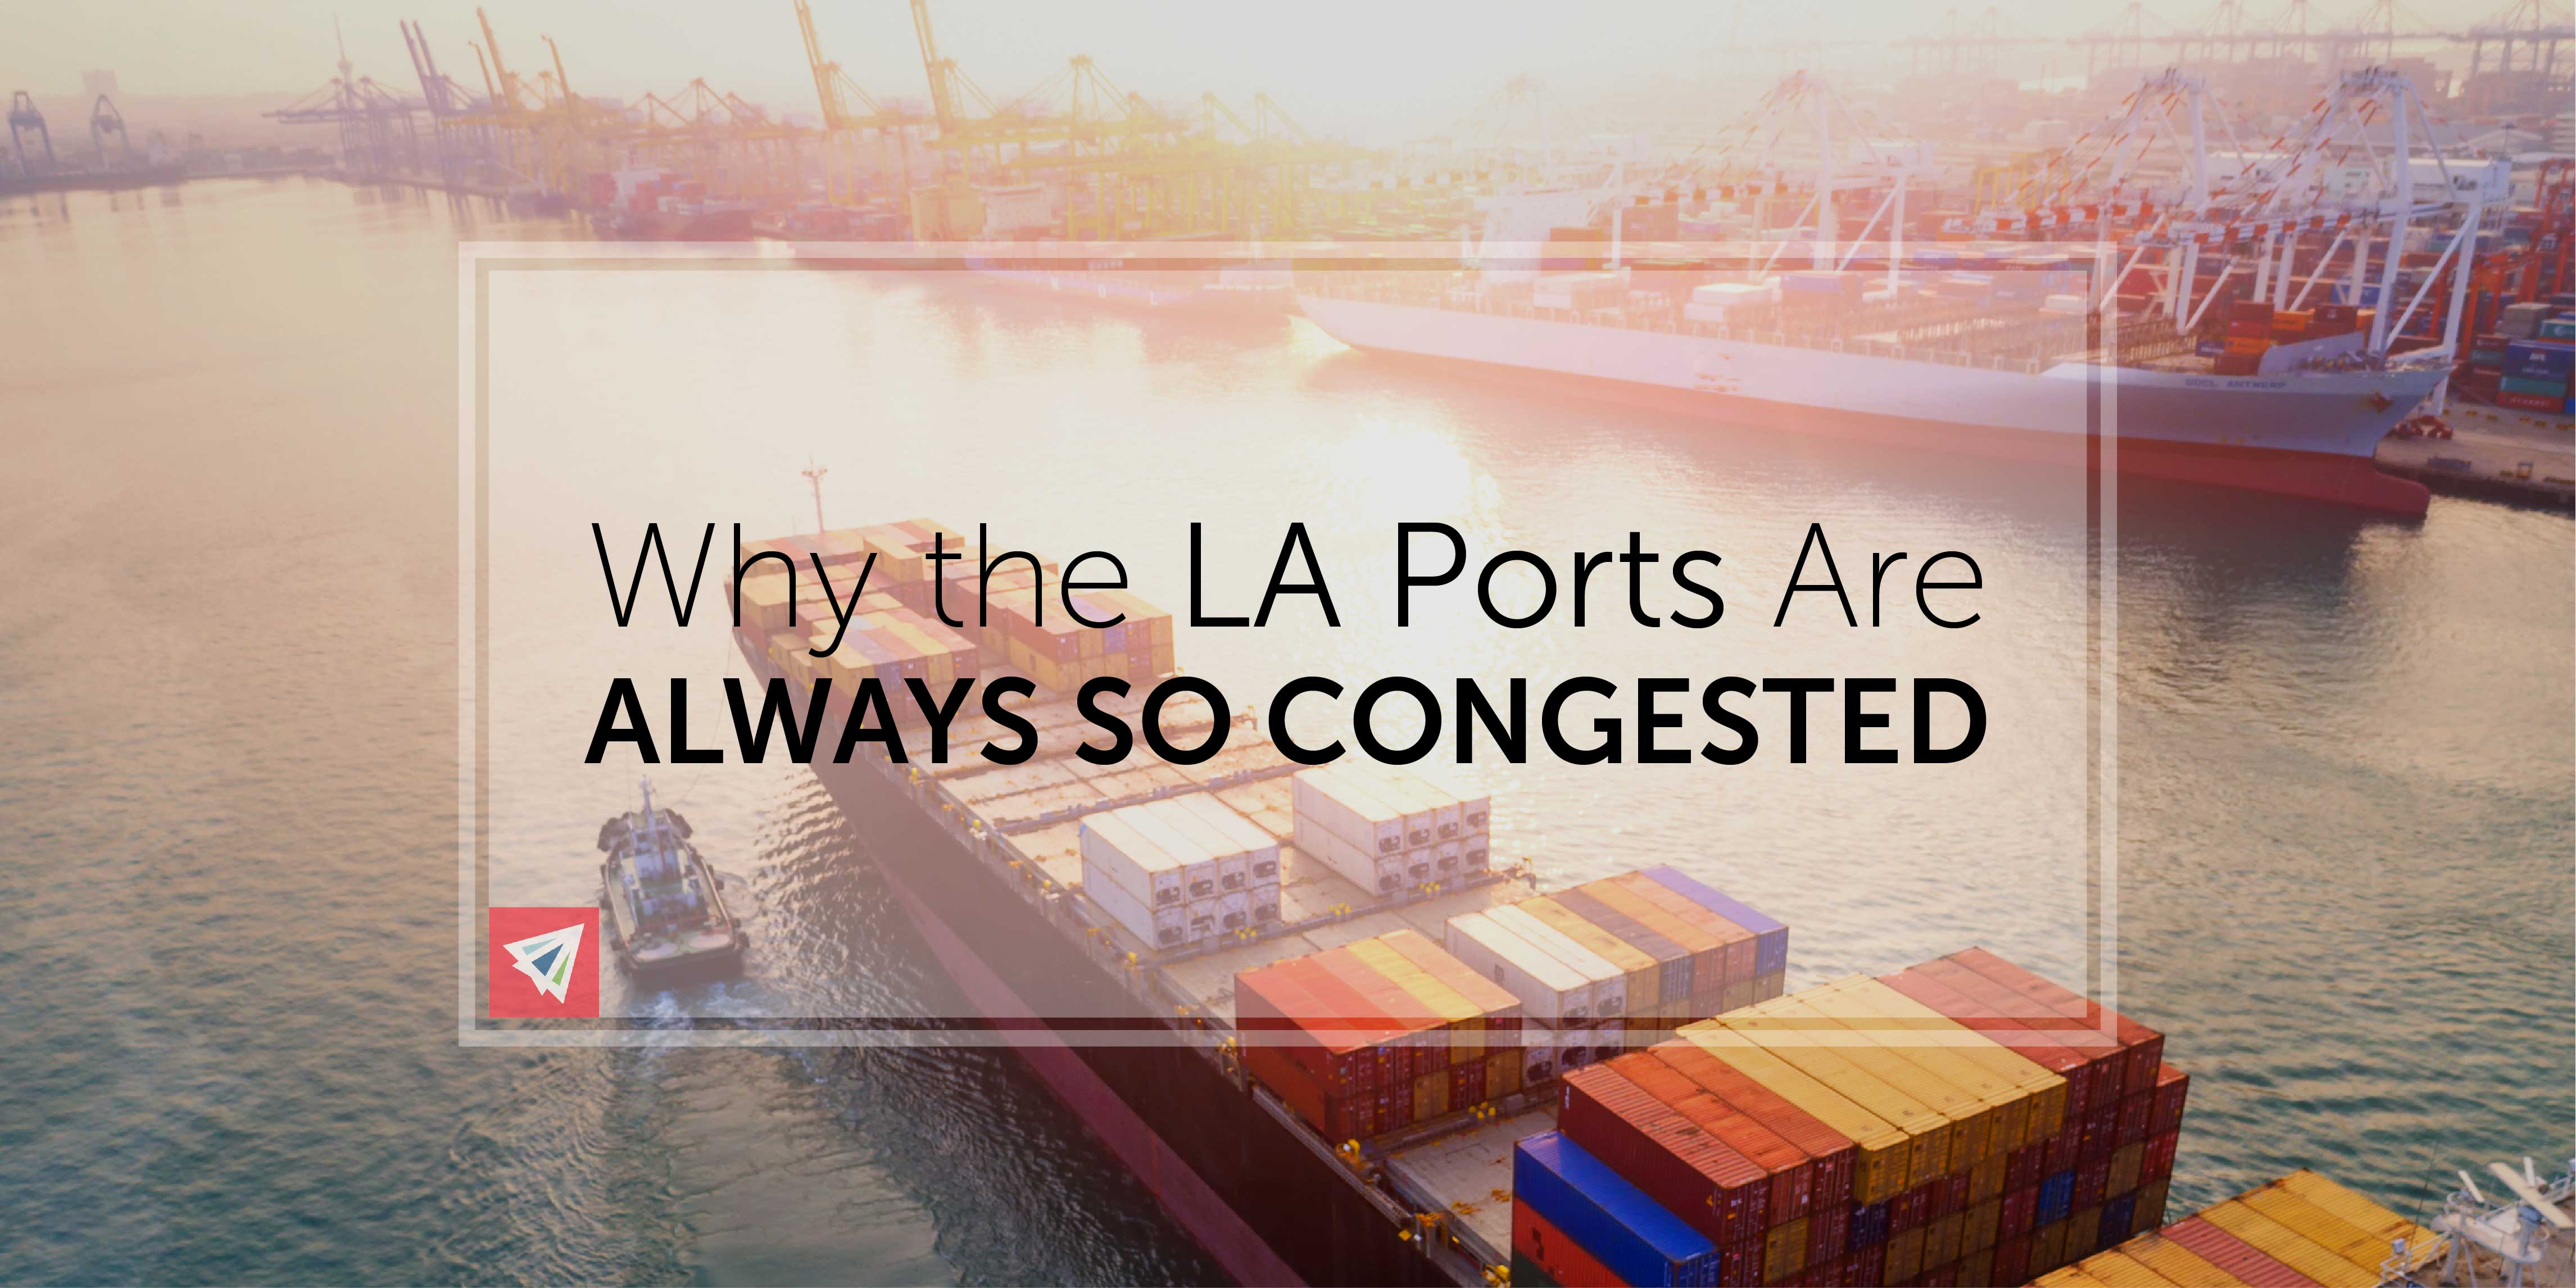 Why LA Ports Are Always Congested